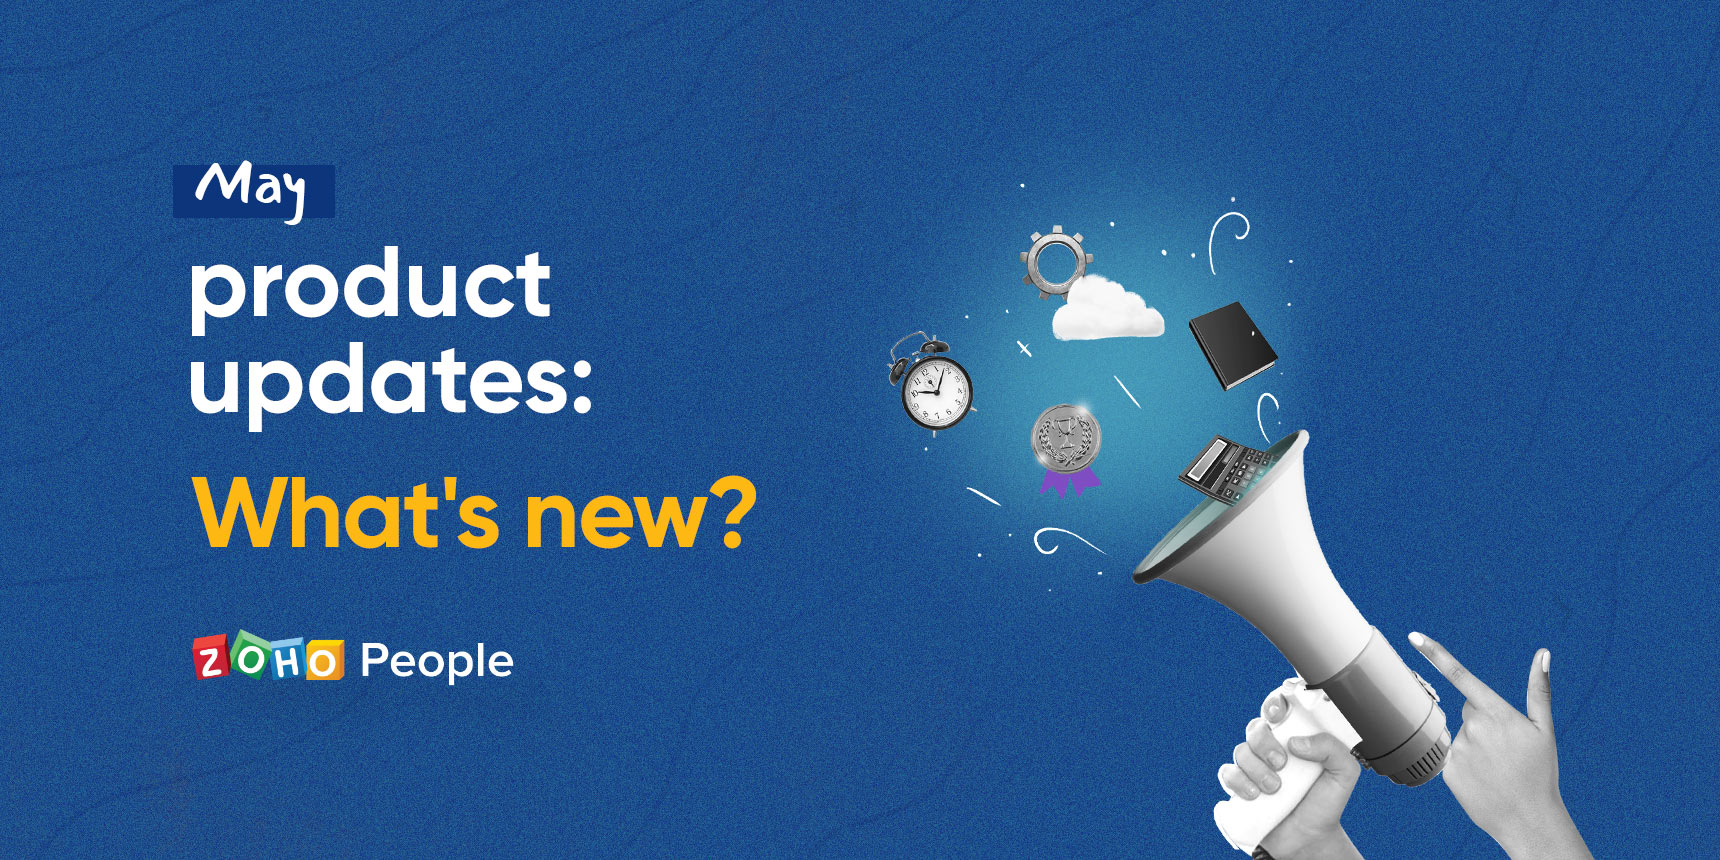 Product updates from Zoho People: What's new in May 2021?